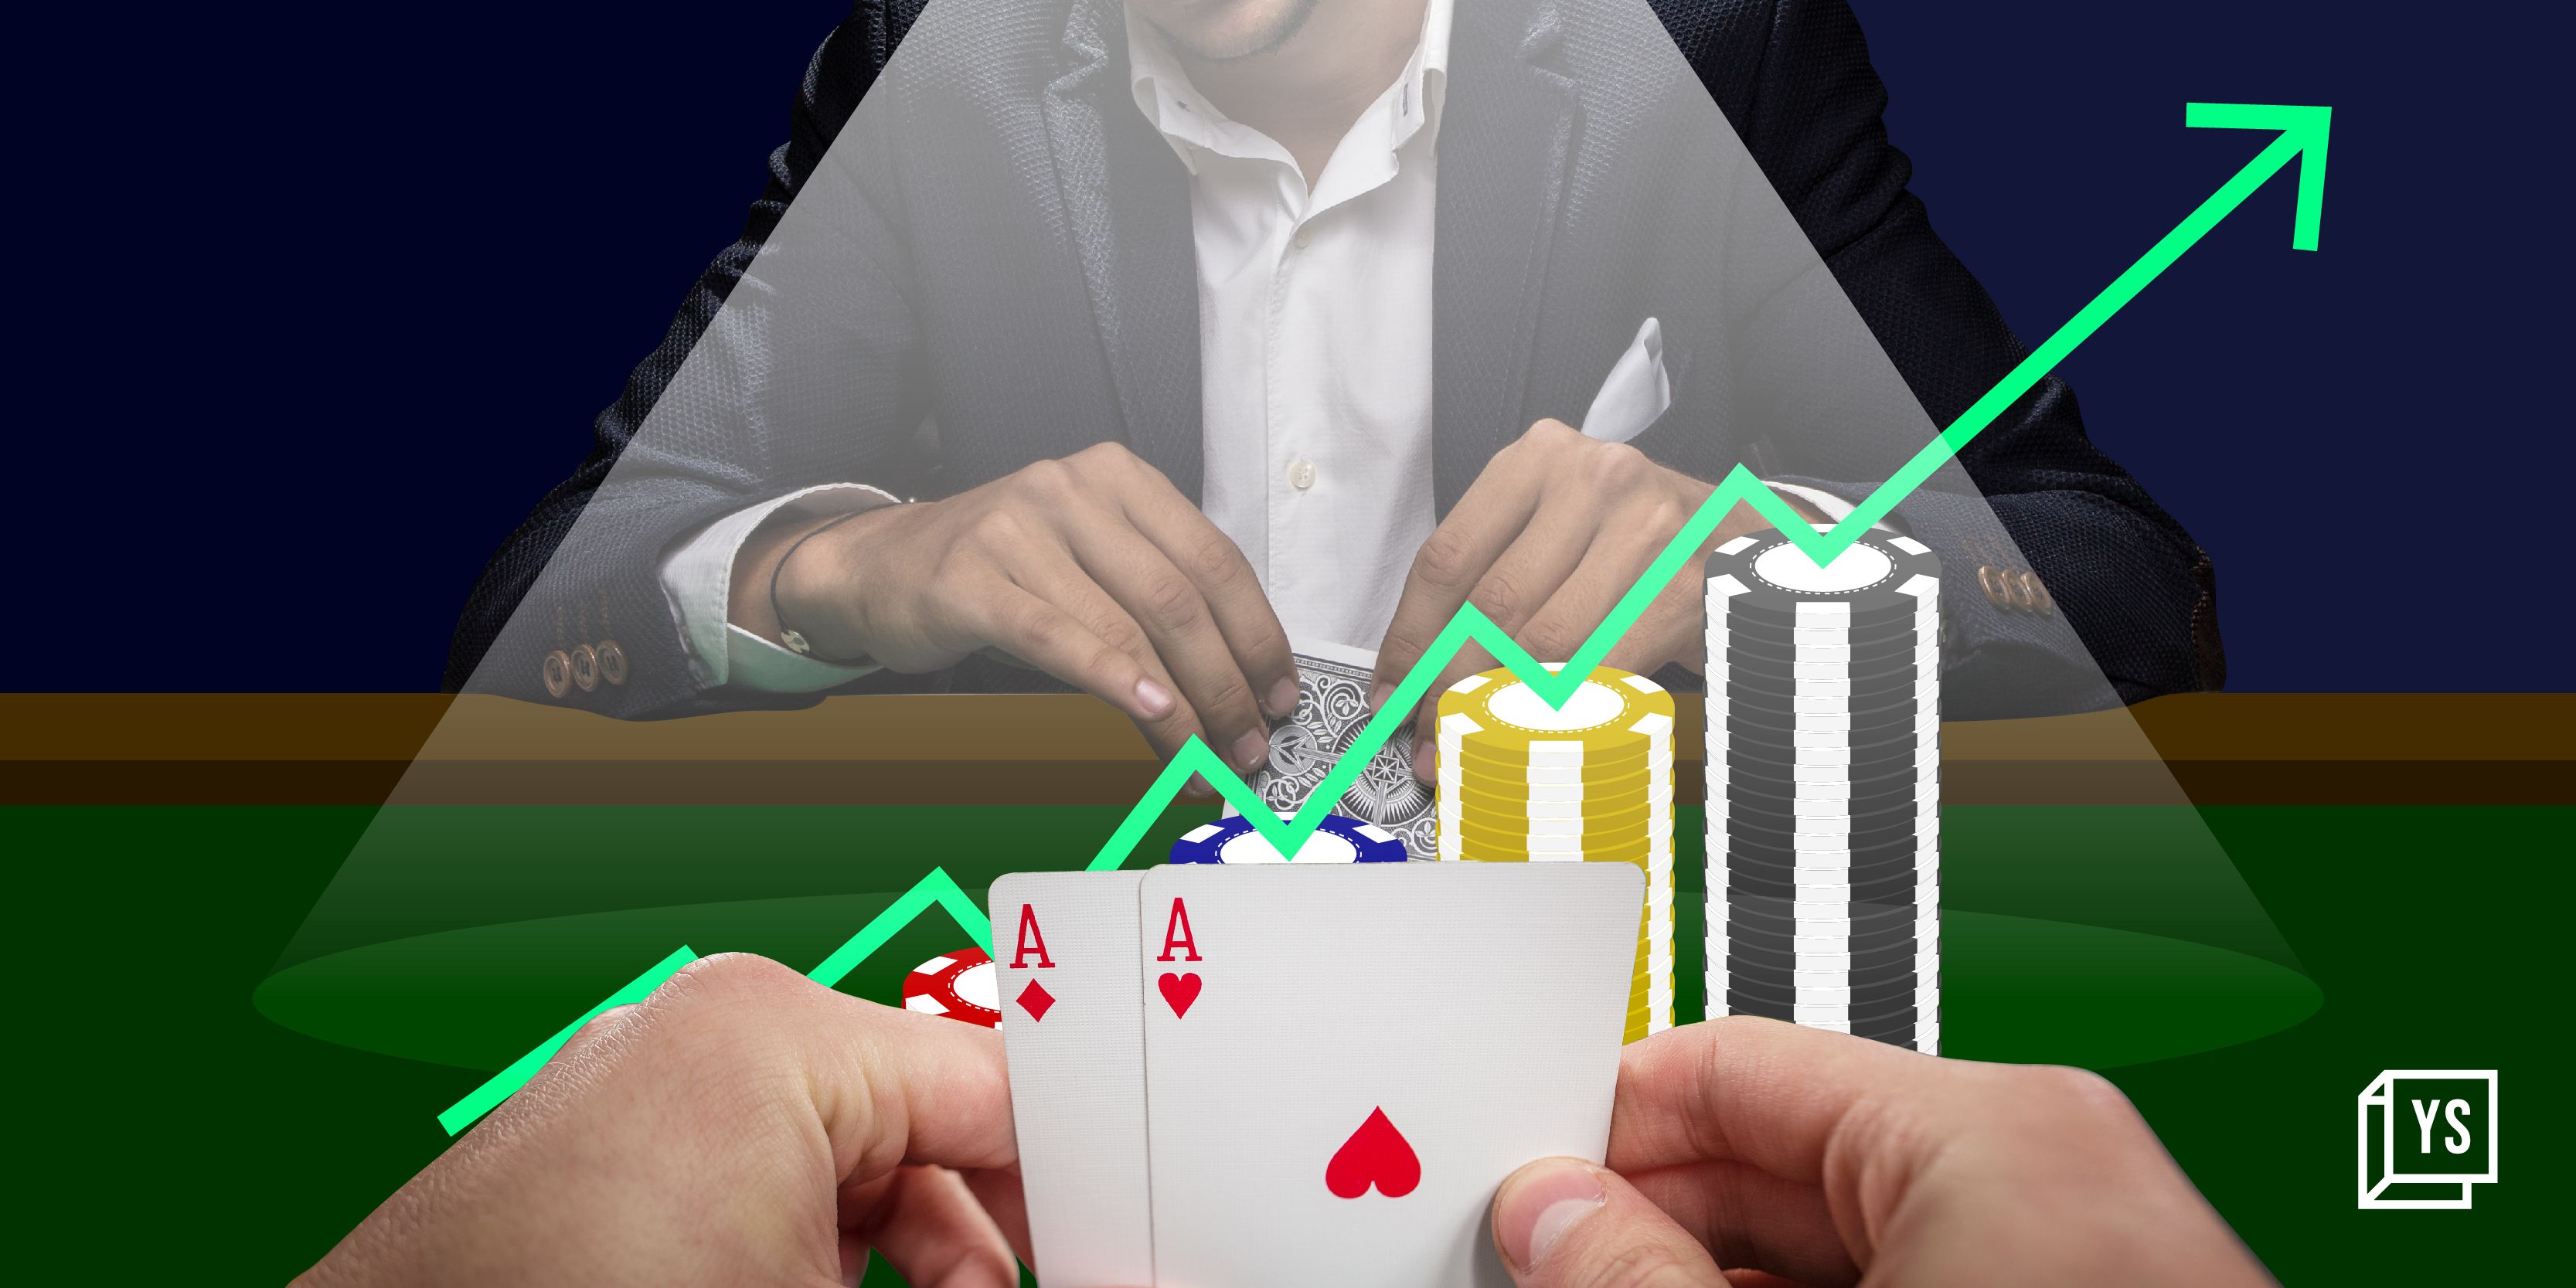 Poker startups continue to attract interest in India despite legal, social tangles 